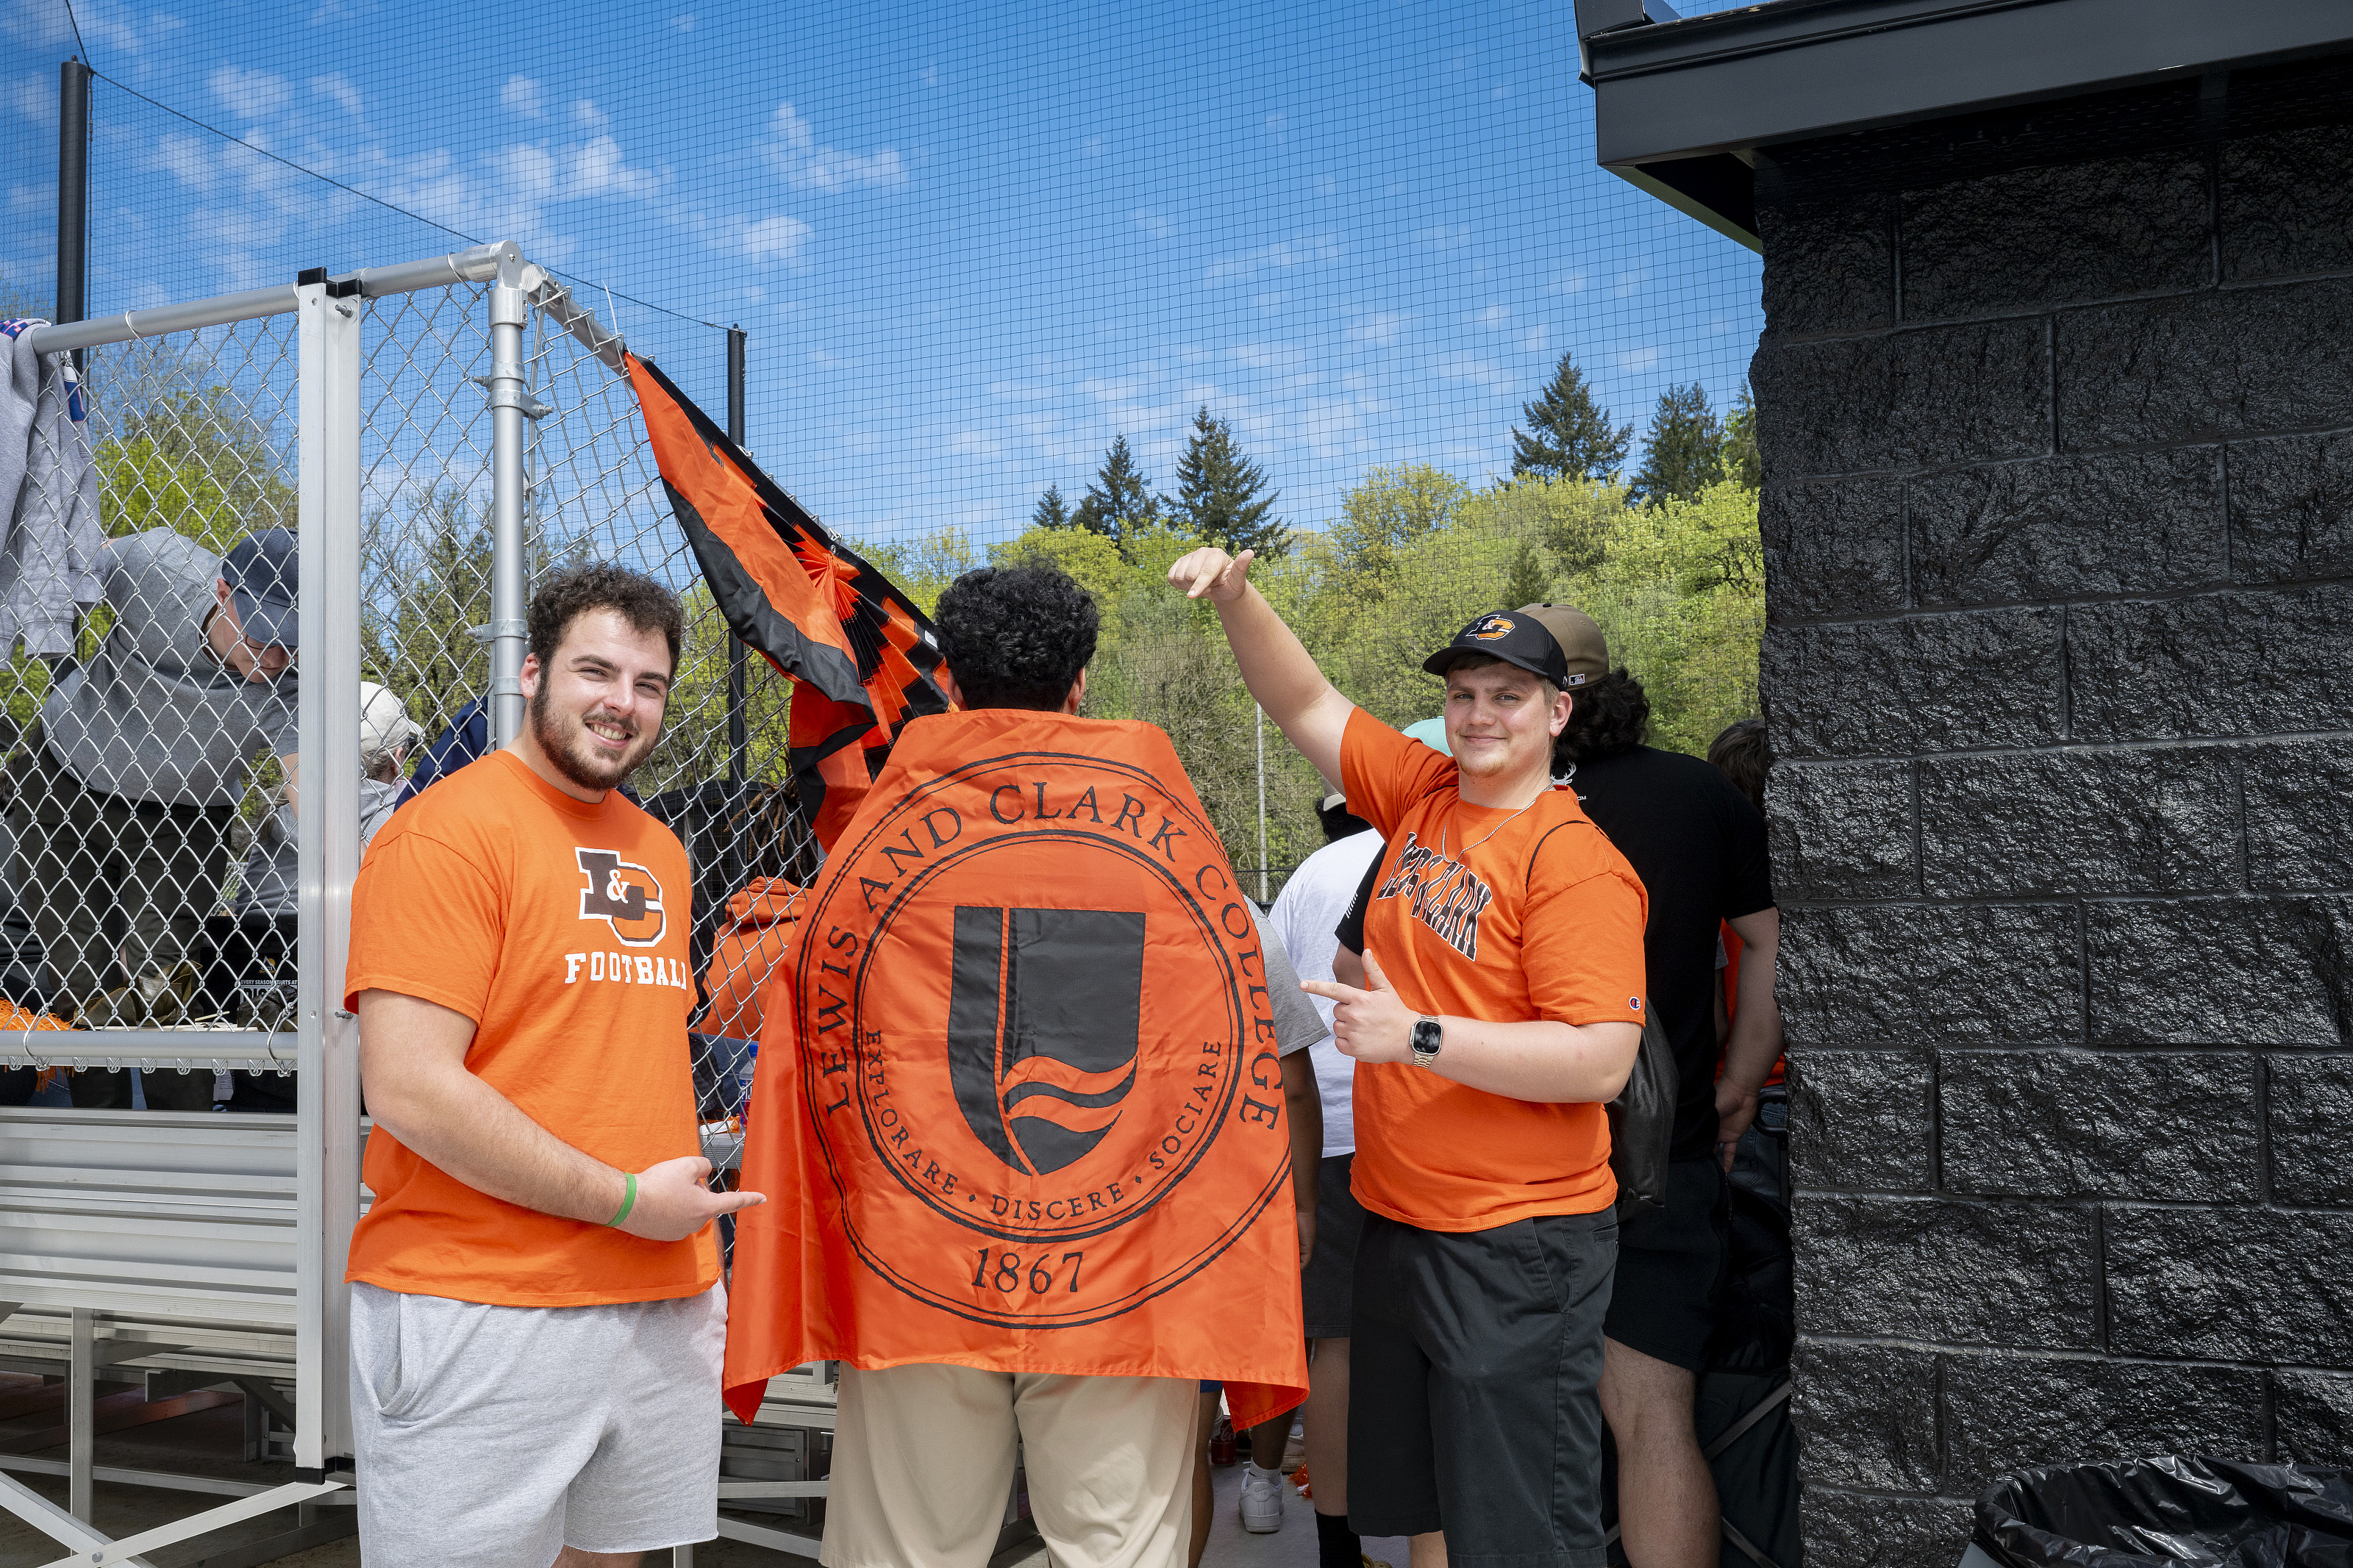 Two students wearing orange L&C athletic shirts point at a third student, with an orange L&C flag draped over his back.